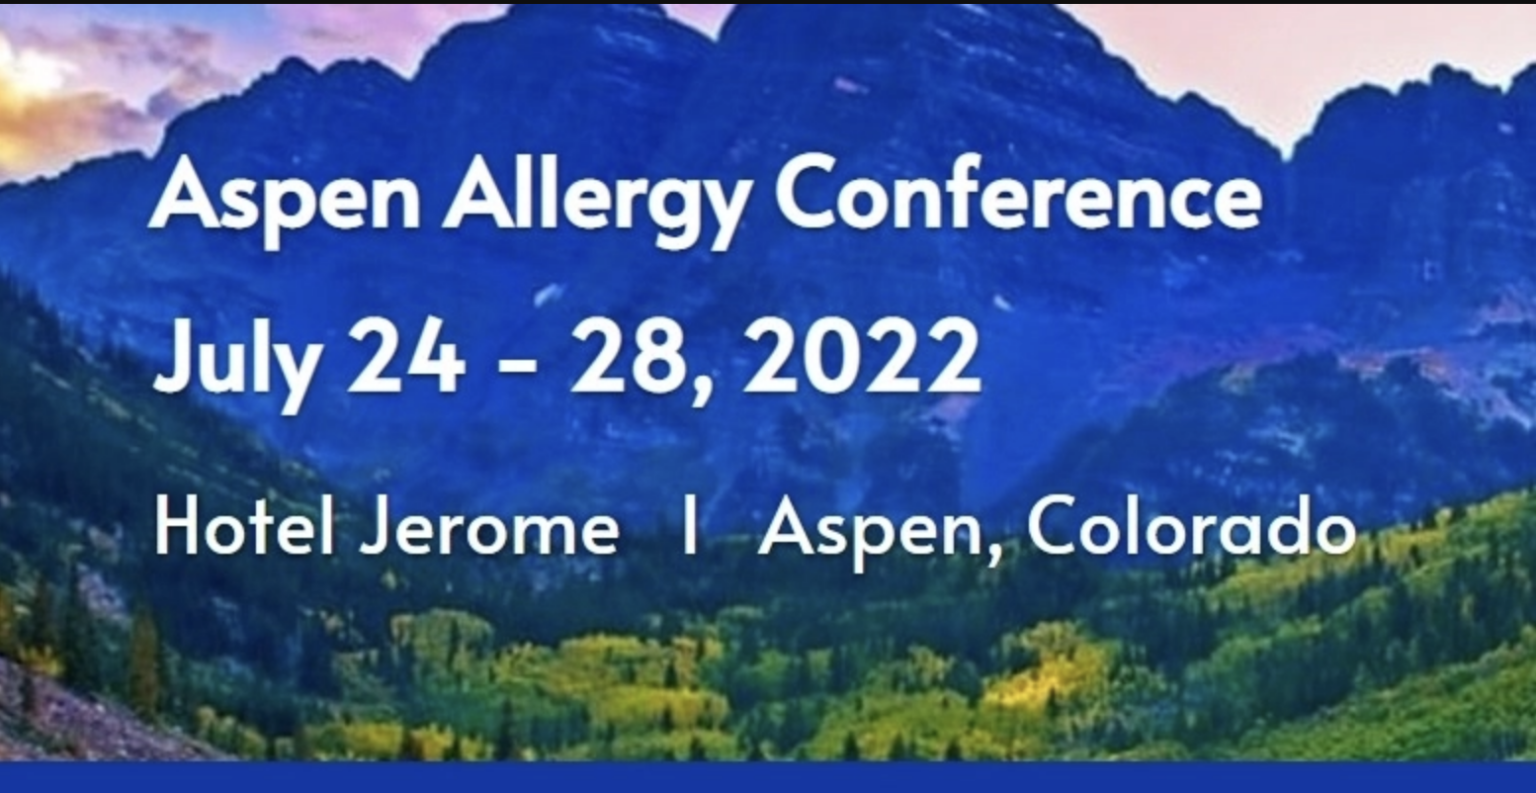 Event Aspen Allergy Conference Association of Pulmonary Advanced